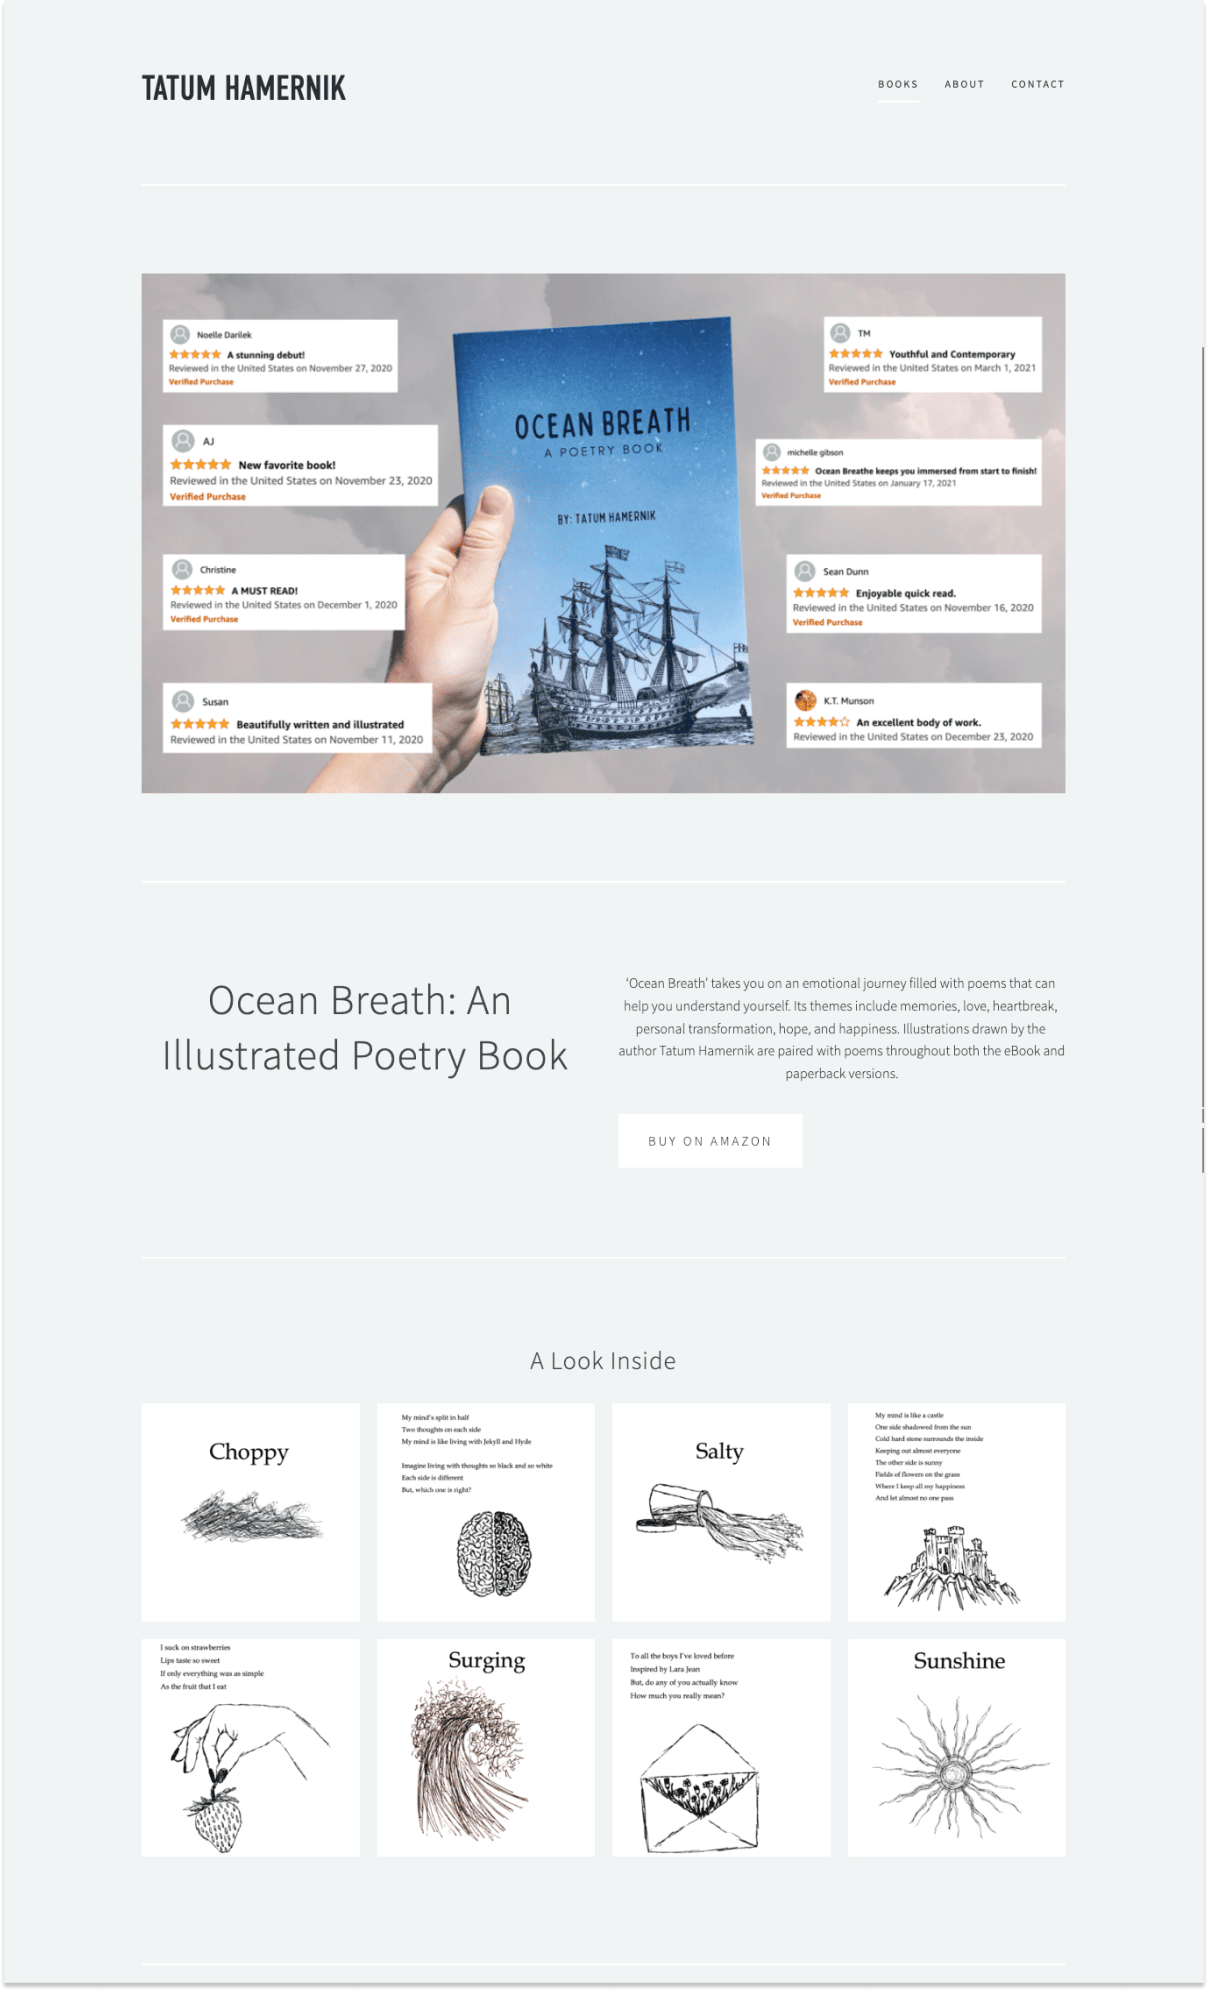 Ocean Breath's author and book landing page